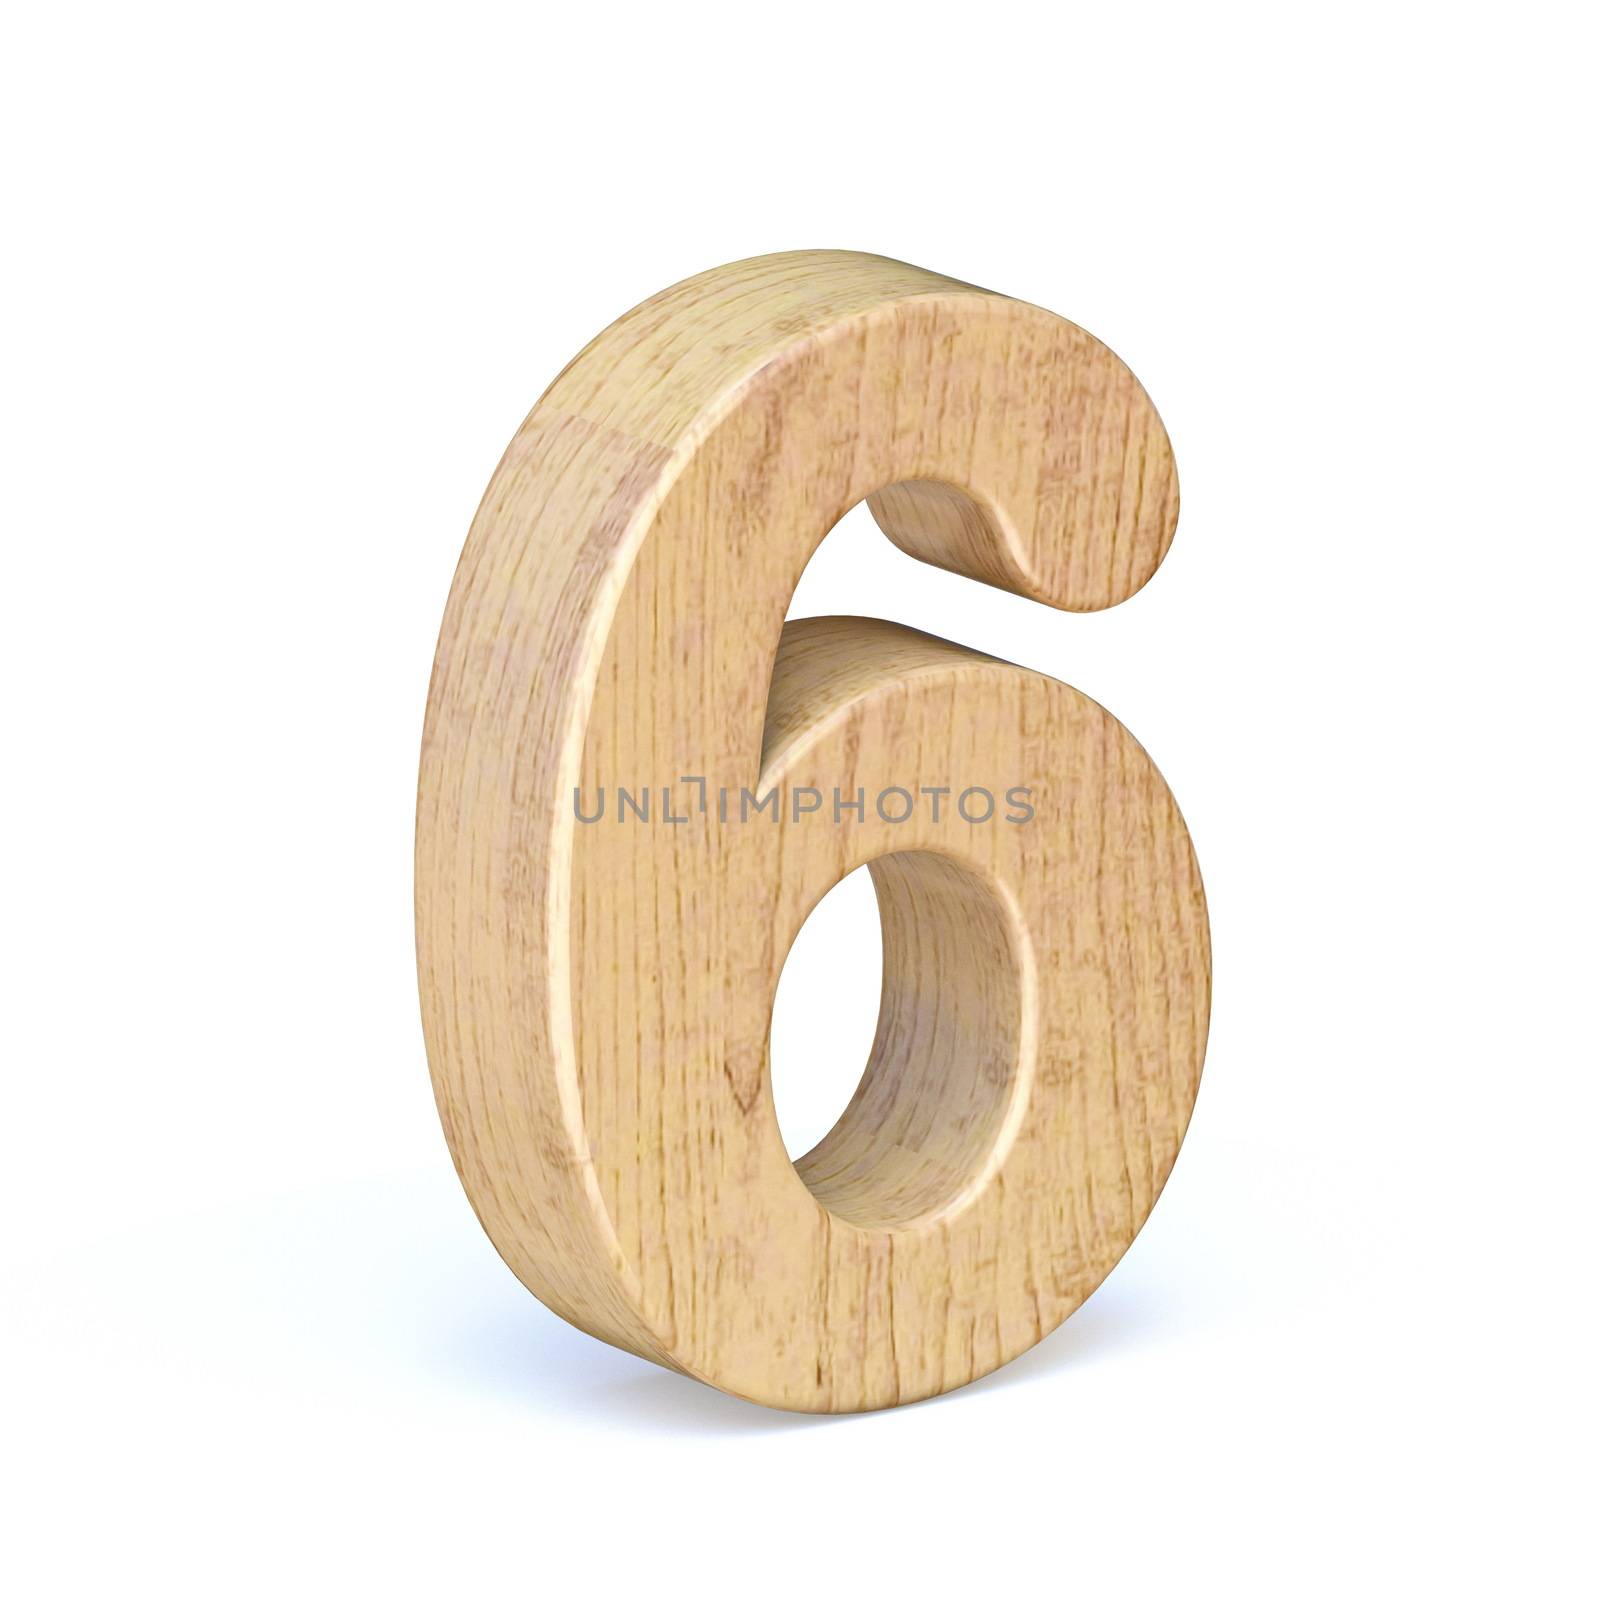 Rounded wooden font Number 6 SIX 3D render illustration isolated on white background